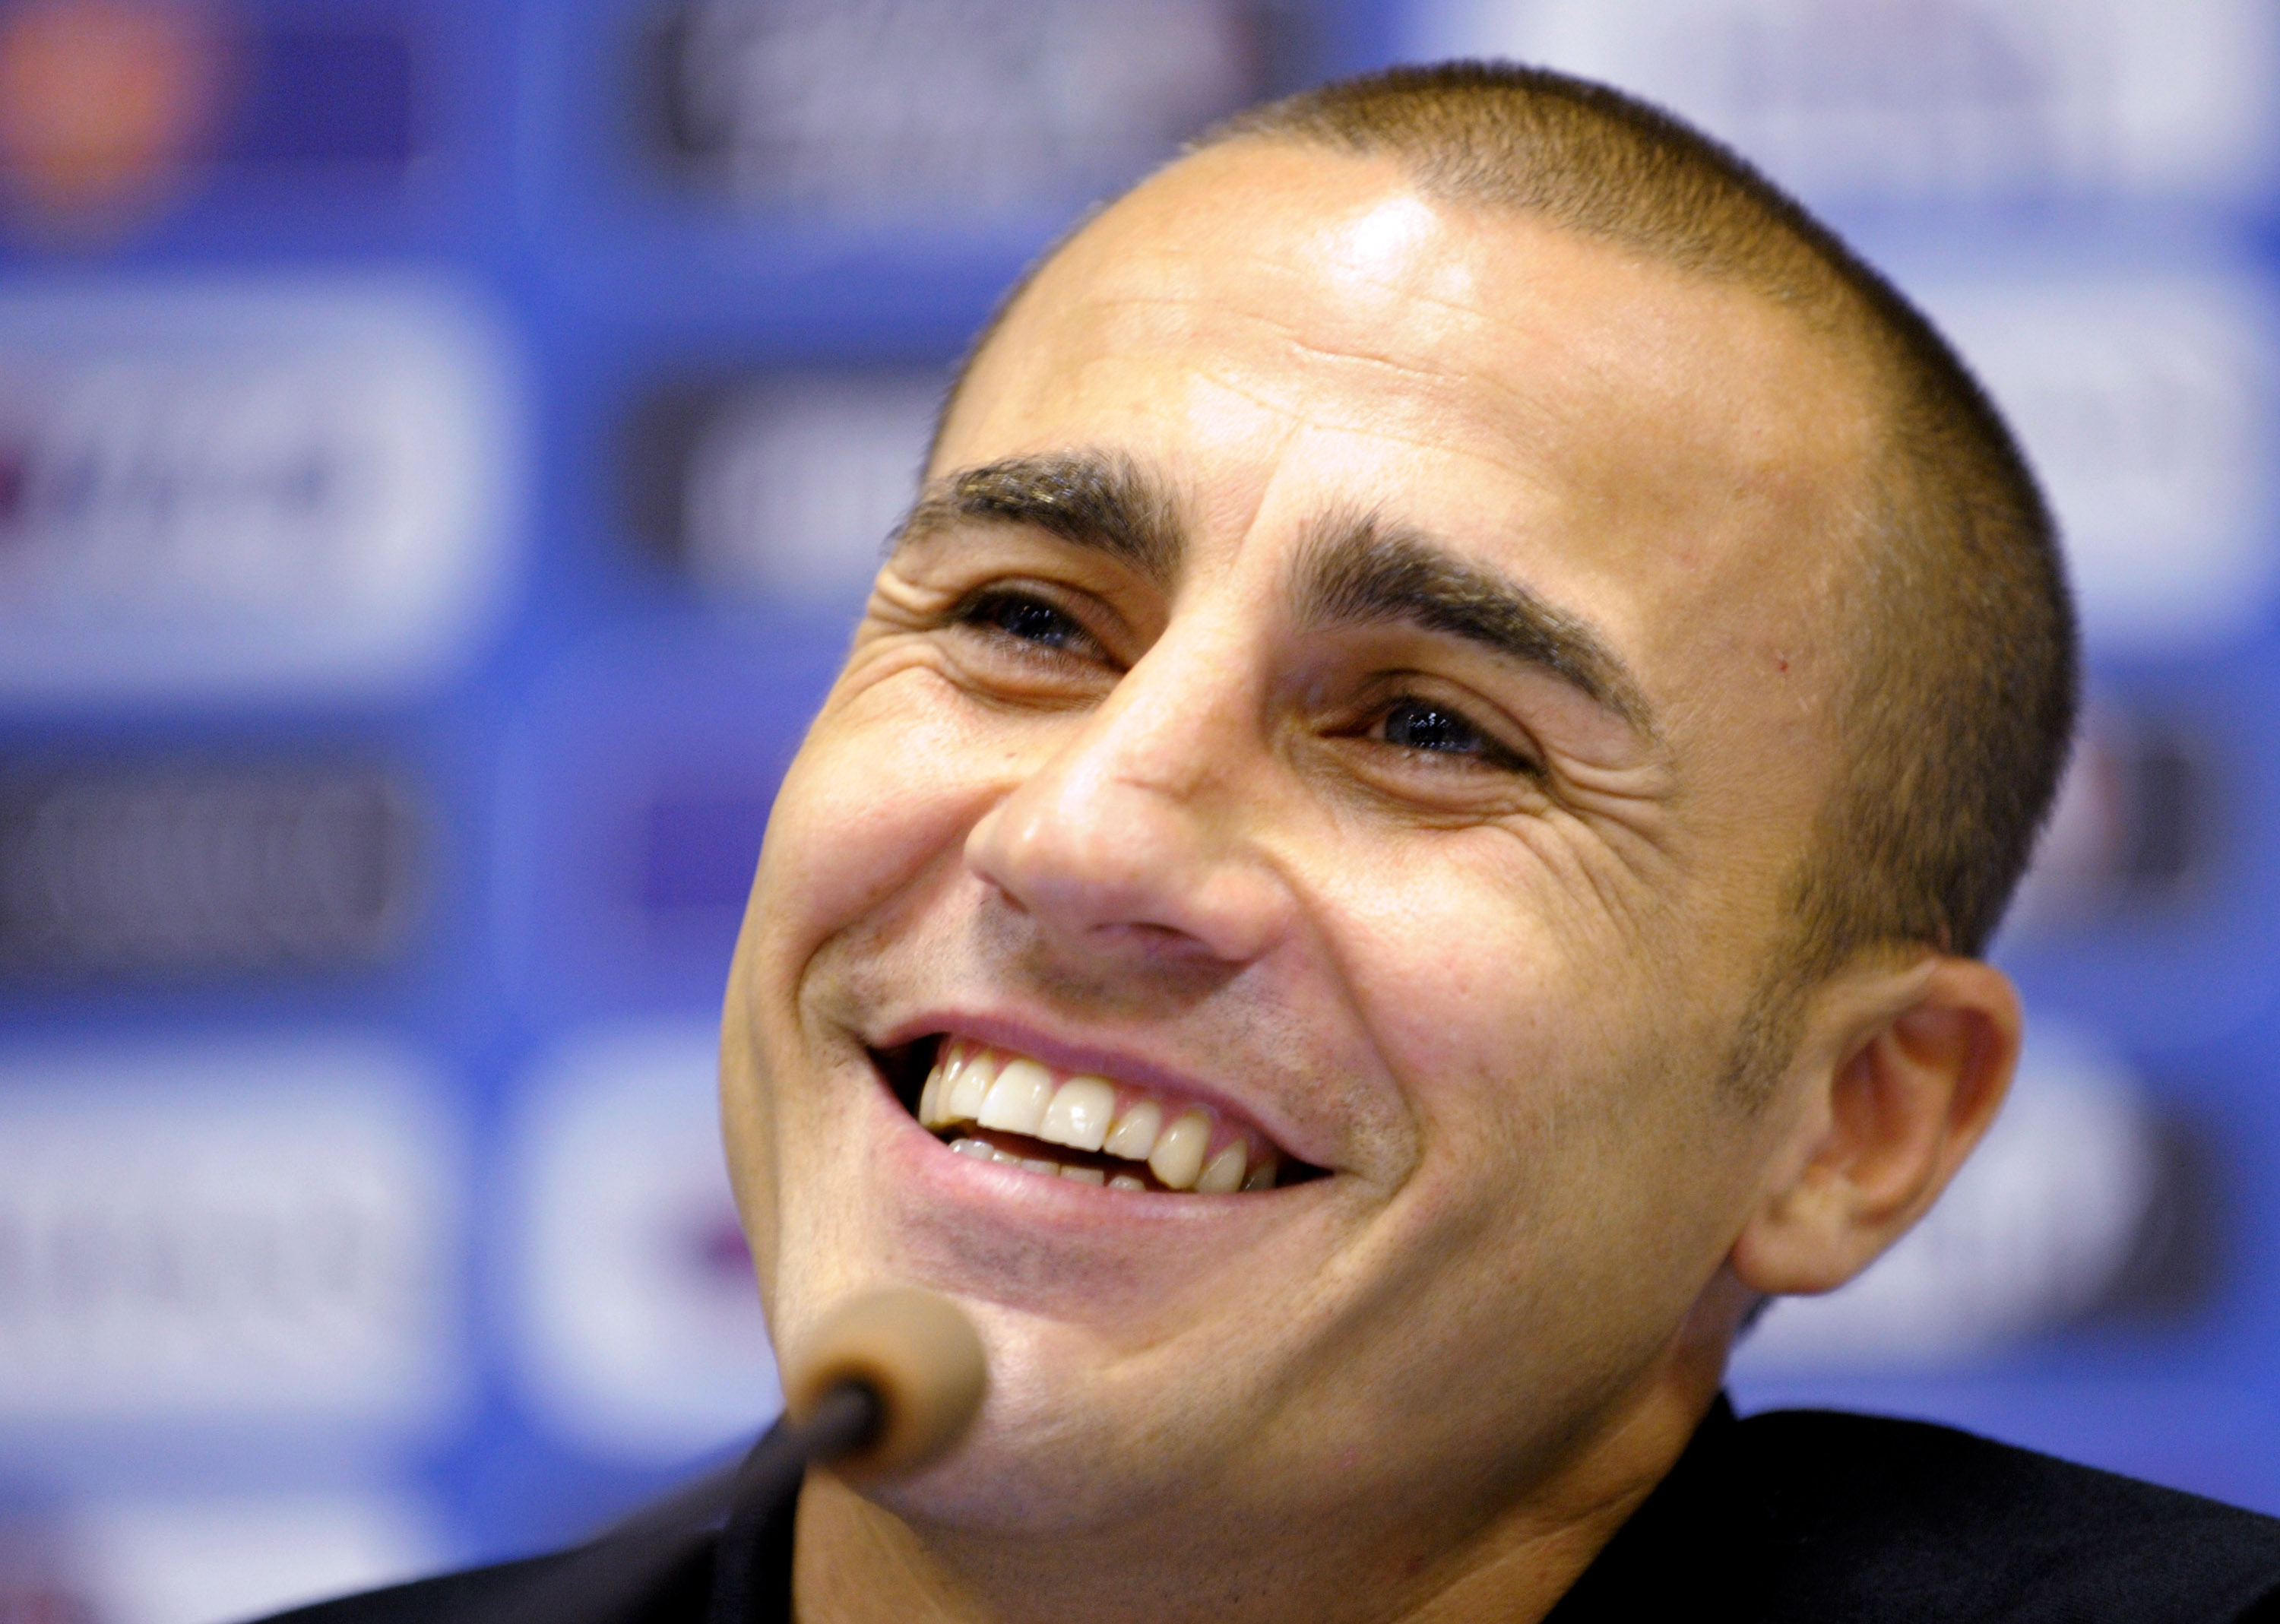 CENTURION, SOUTH AFRICA - JUNE 11: Fabio Cannavaro of Italy attends a Press Conference during 2010 FIFA World Cup on June 11, 2010 in Centurion, South Africa. (Photo by Claudio Villa/Getty Images)